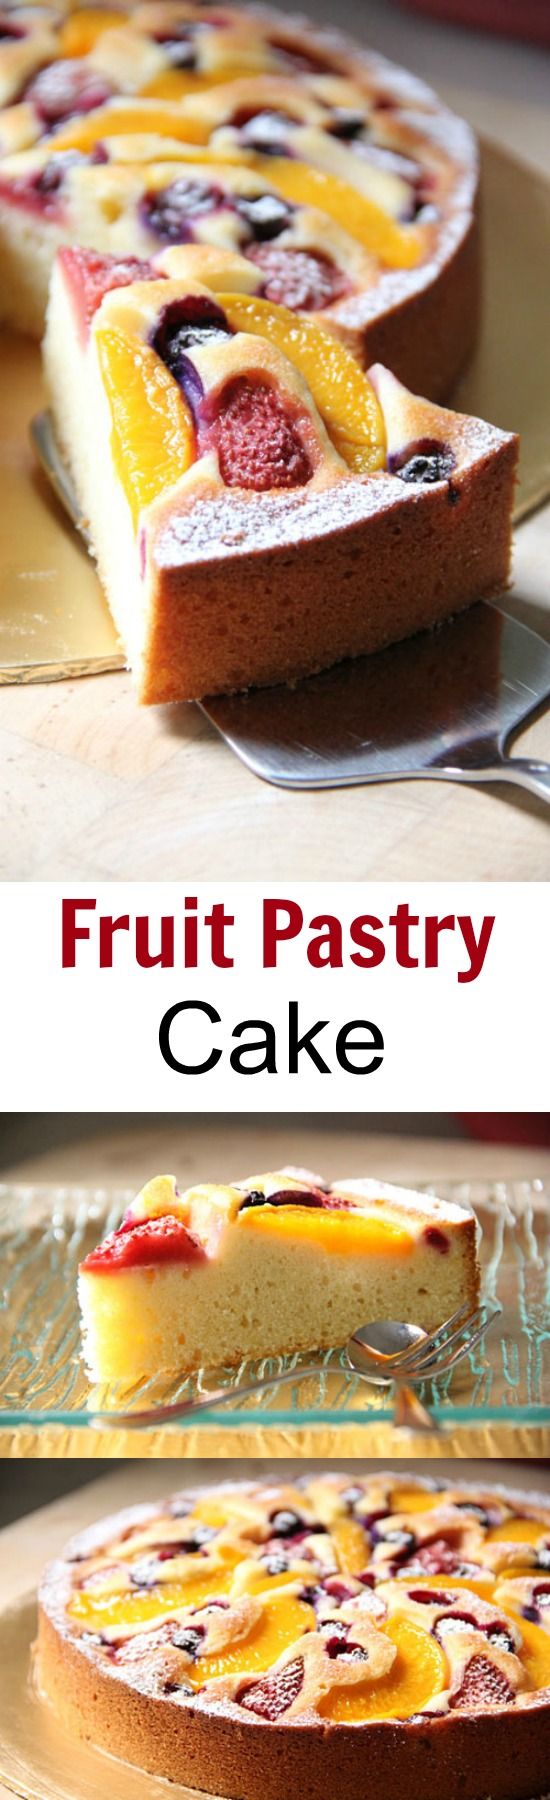 Fruit Pastry Cake - yummy, juicy fruits on top of a rich and sweet cake. AMAZING recipe that you have to bake | rasamalaysia.com